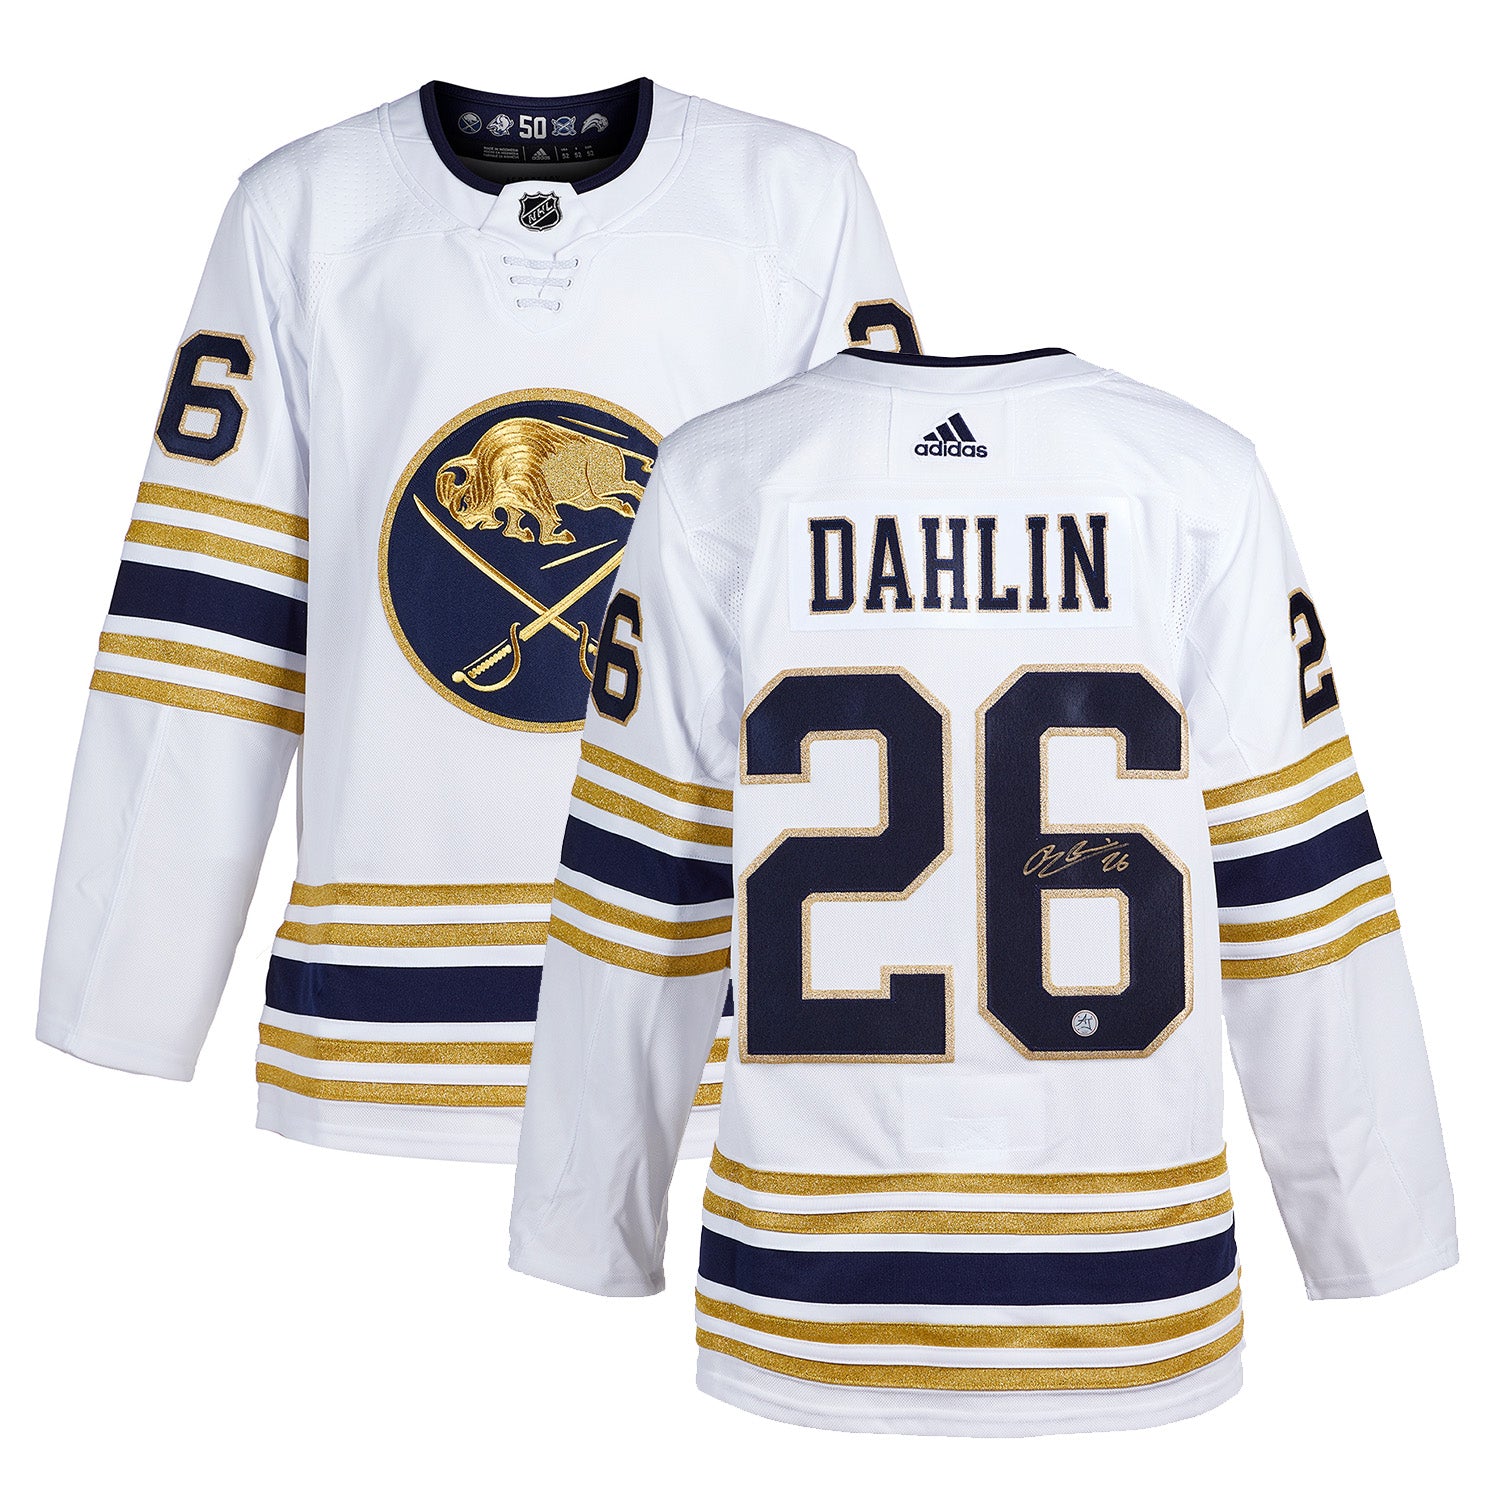 Rasmus Dahlin Buffalo Sabres Adidas Pro Autographed Jersey - NHL Auctions